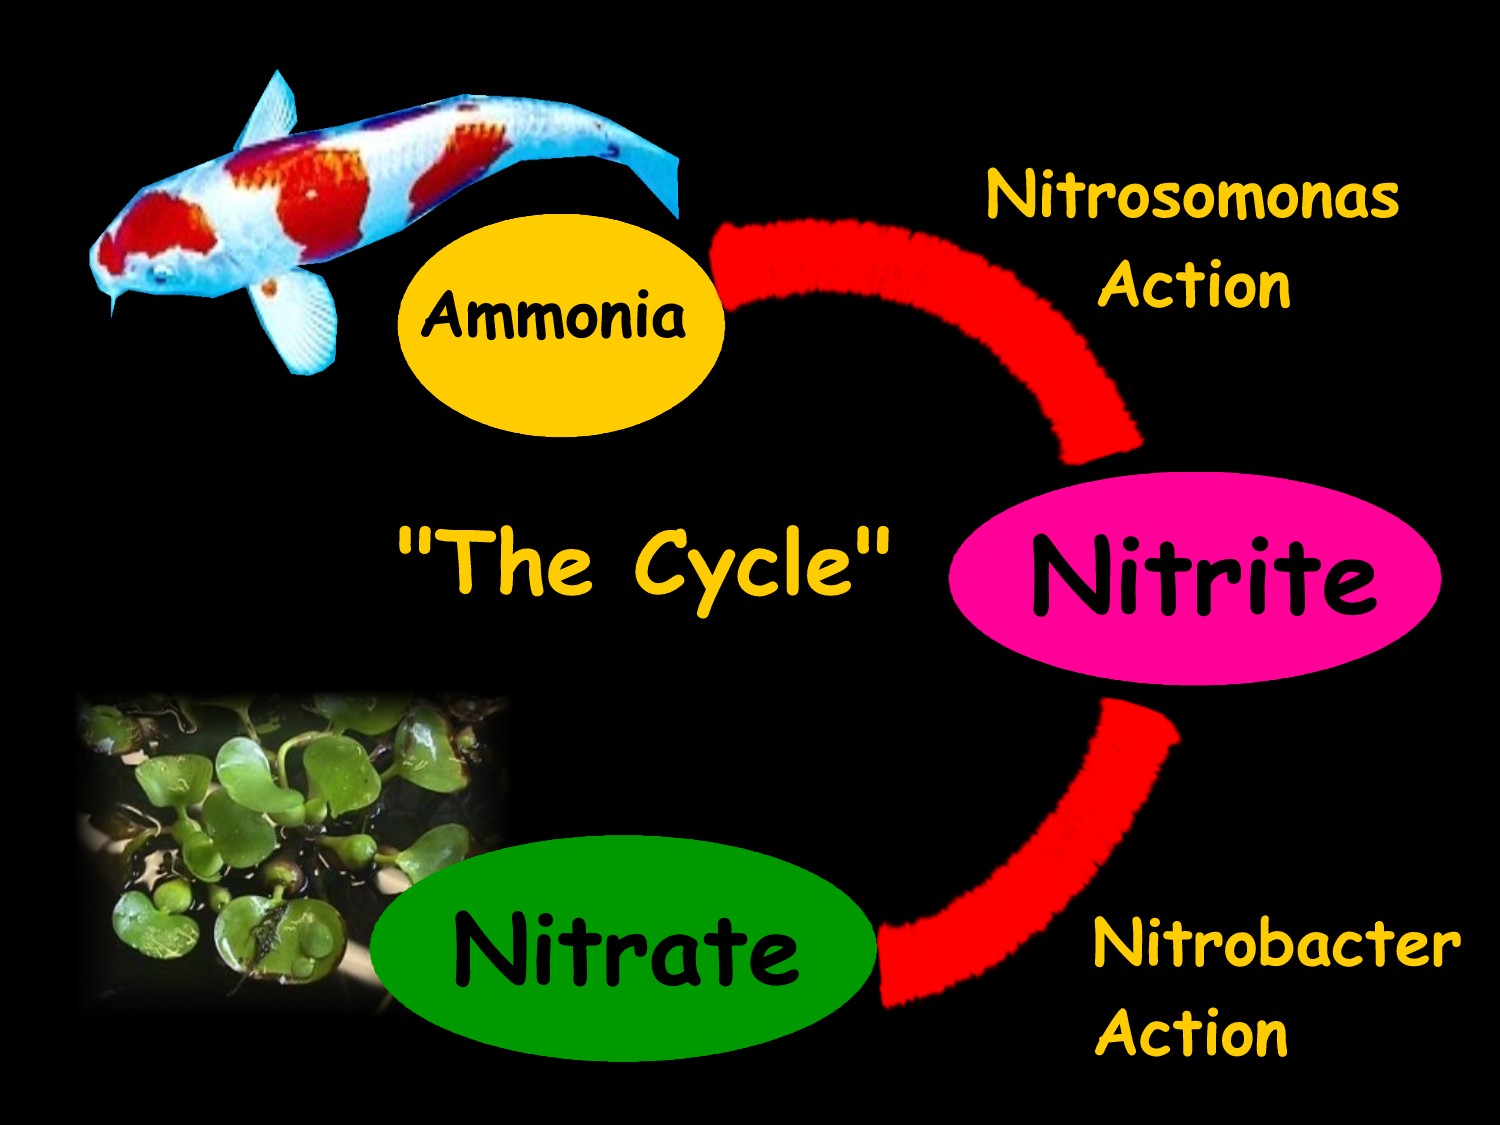 The nitrogen cycle